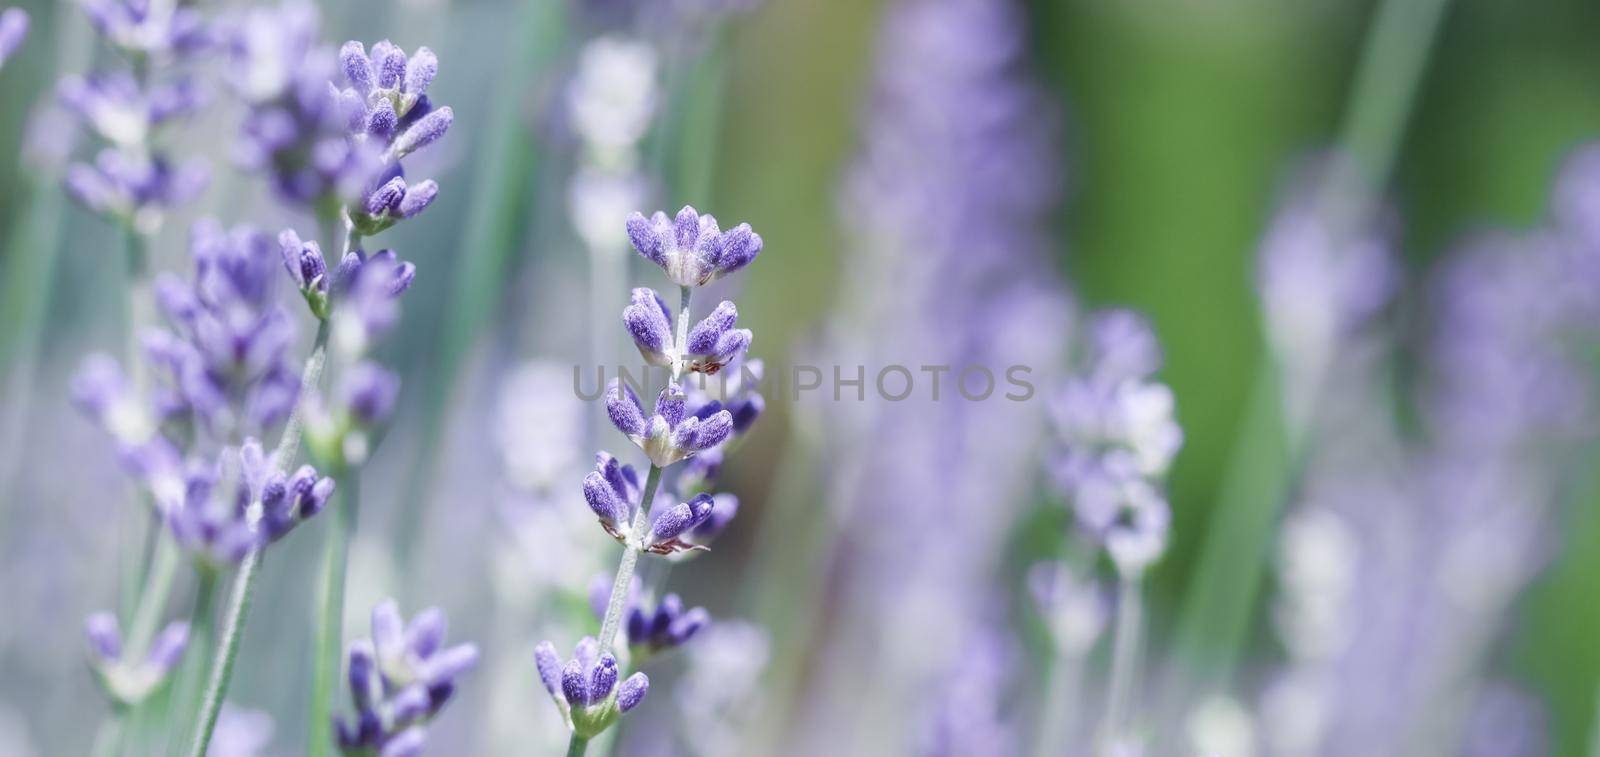 Soft focus on beautiful lavender flowers in summer garden by Olayola